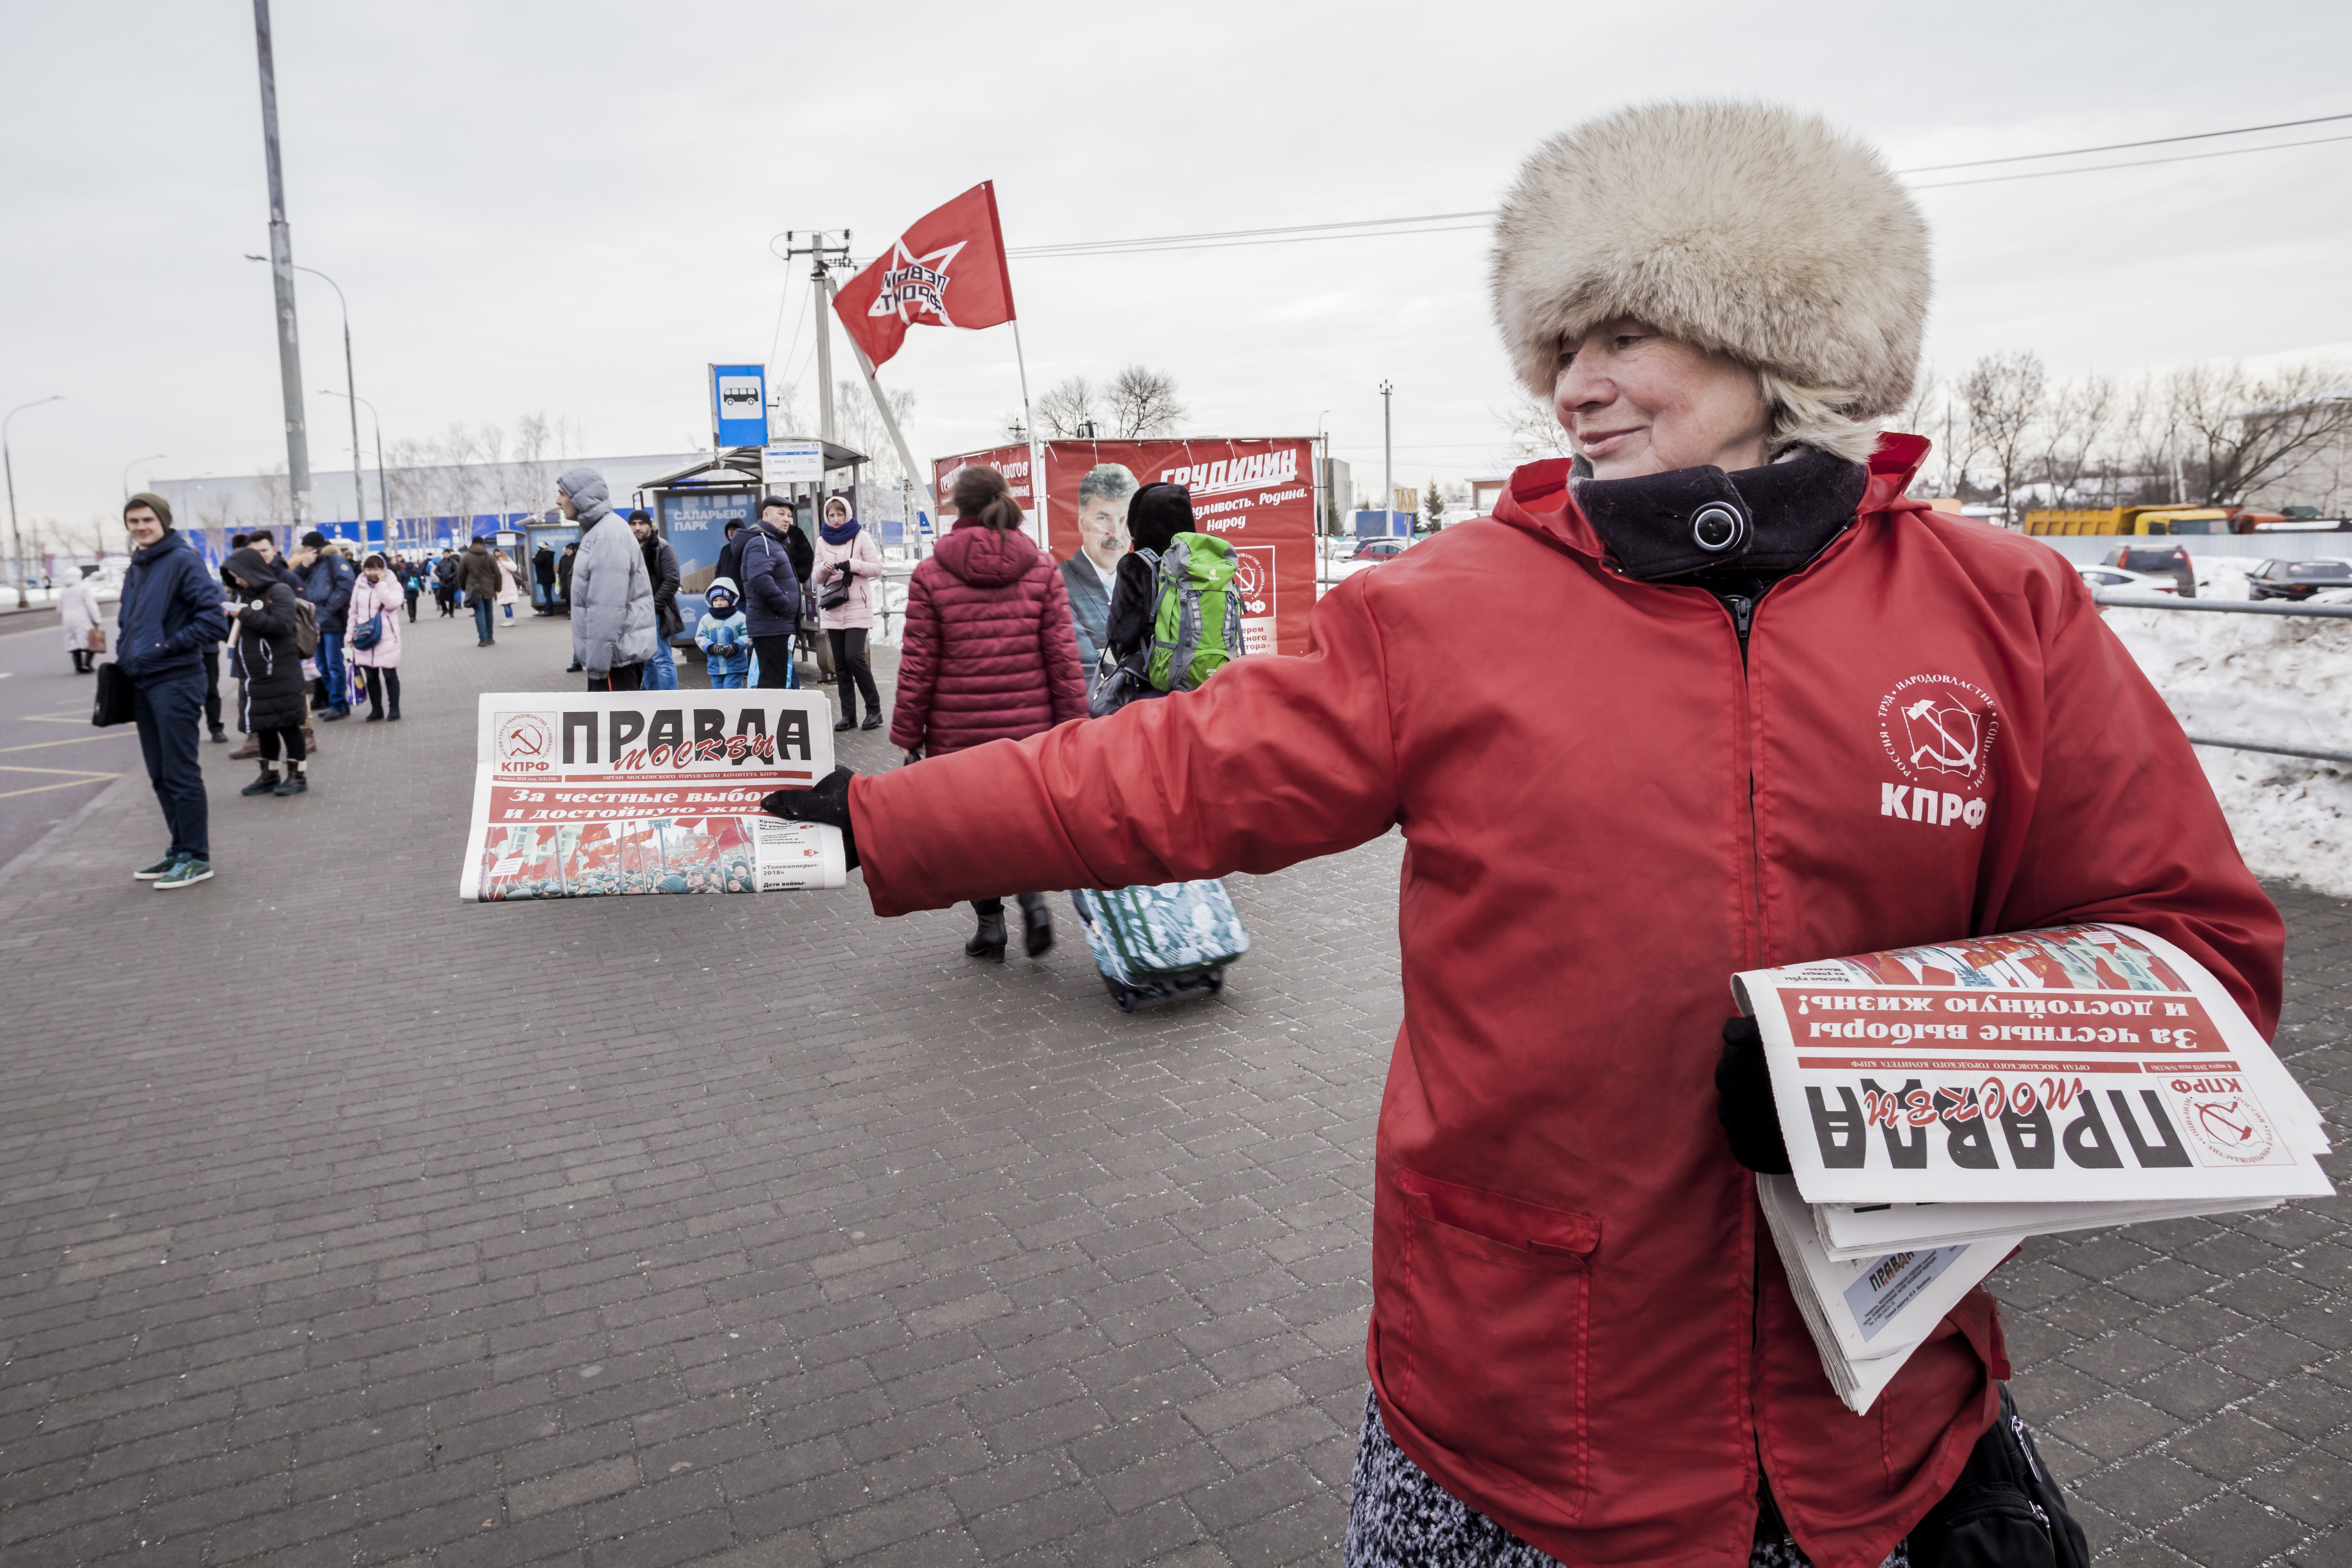 A Communist Party supporter gives pamphlets in the streets of Moscow, Russia, on 14 March 2018 during the presidential campaign of Russia 2018. (Photo by Celestino Arce/NurPhoto/Sipa/AP)